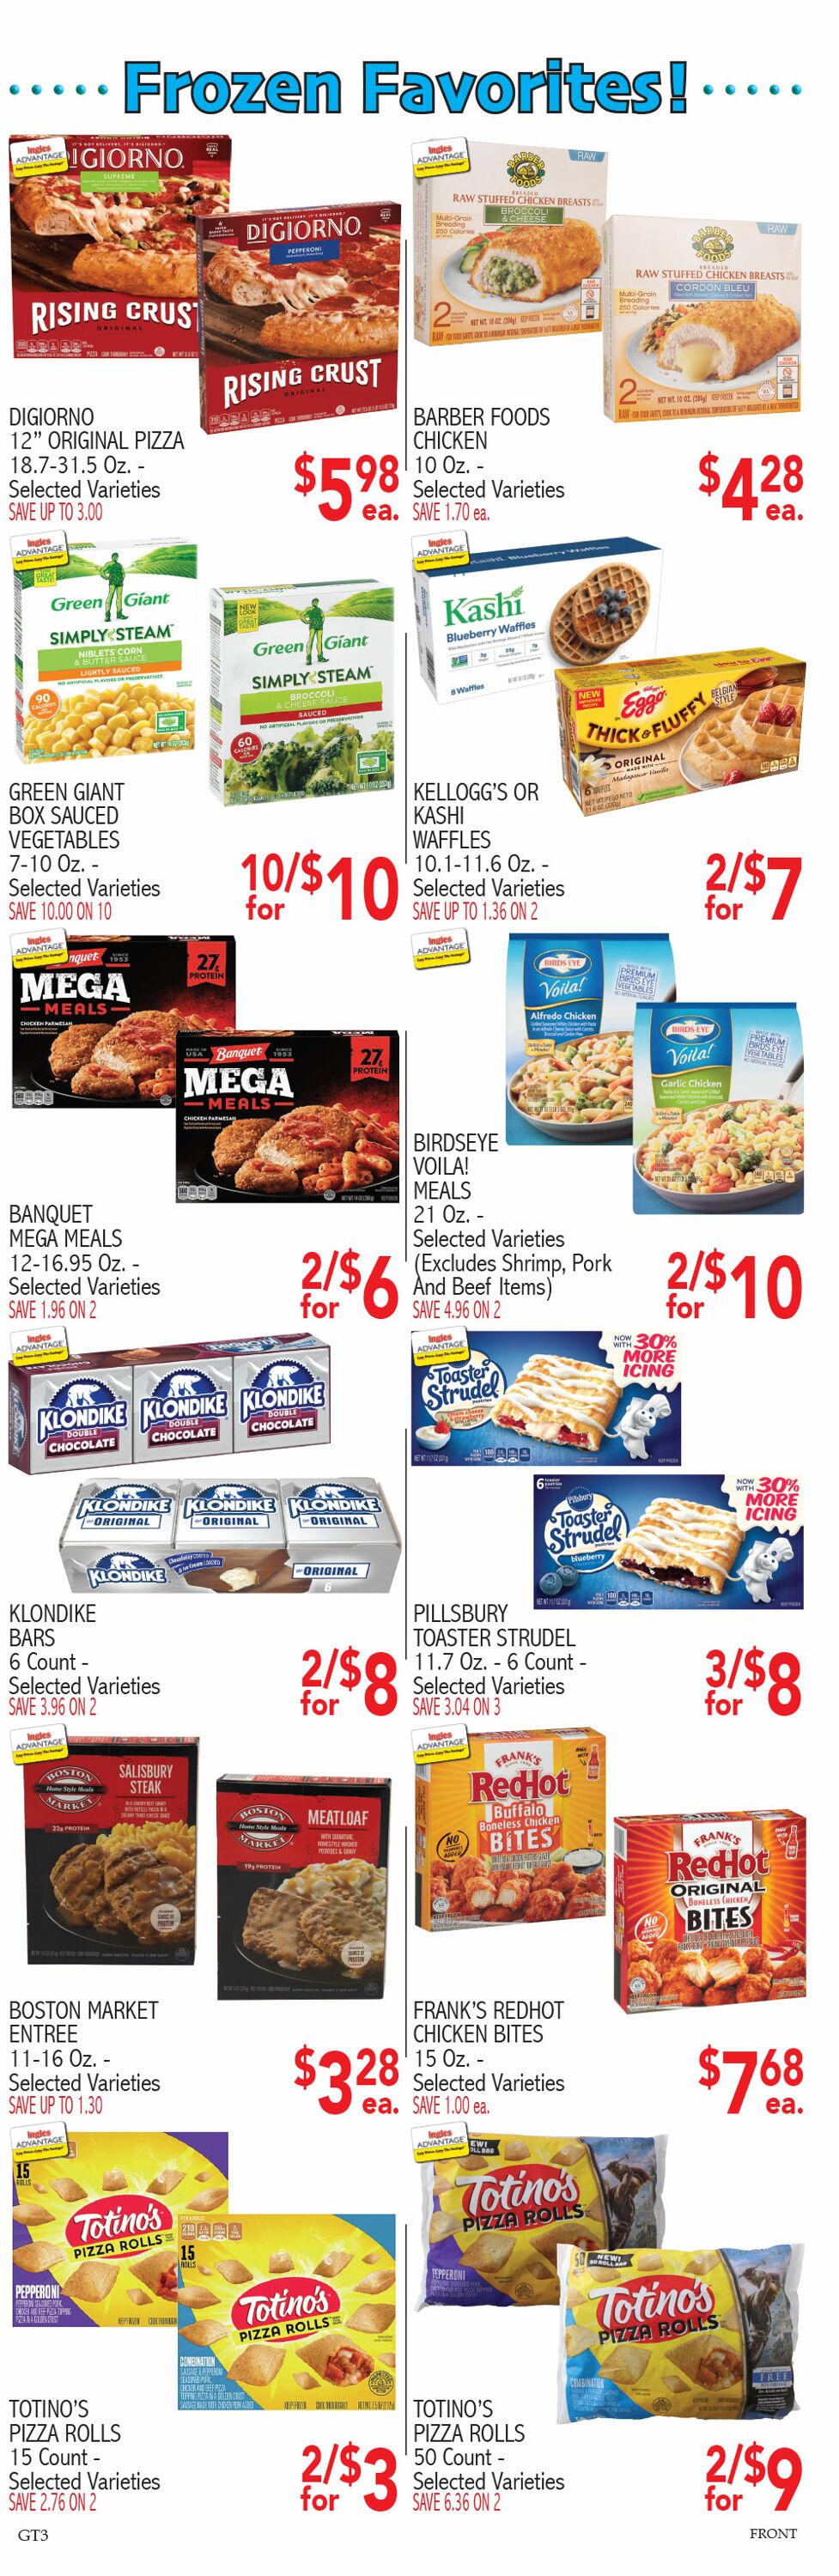 Ingles Ad from 03/22/2023